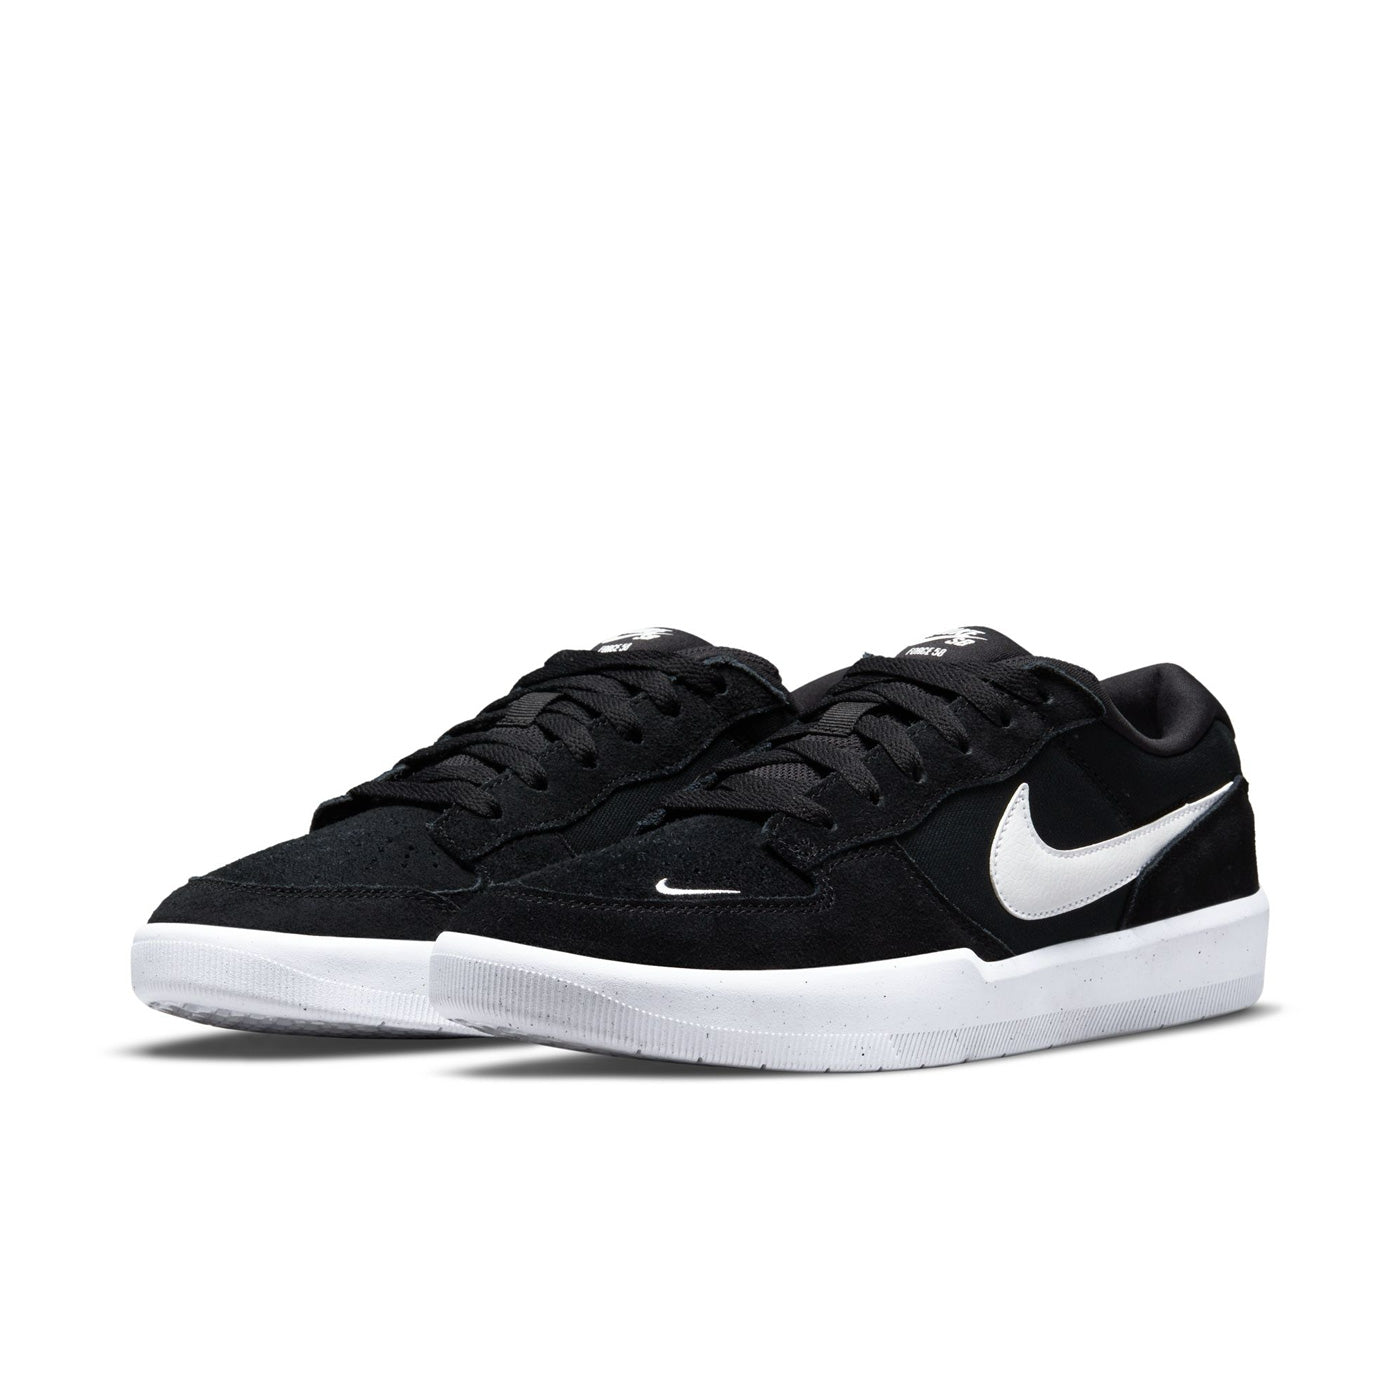 Black nike sb force 58 low top shoes with white sole and white nike logo. Free shipping over £50